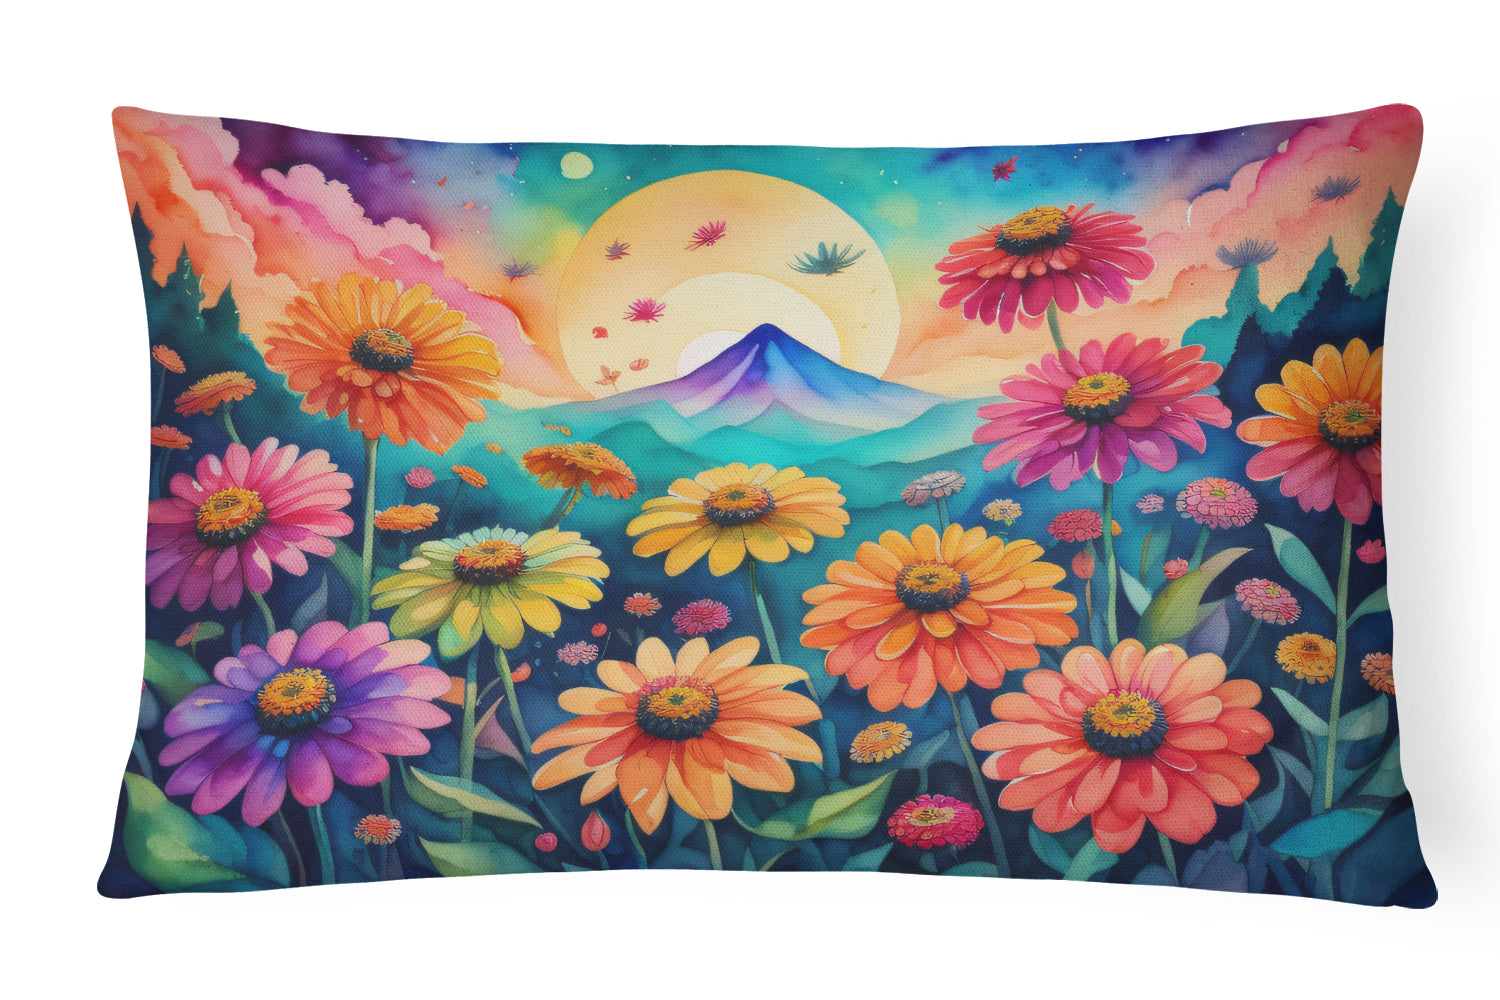 Buy this Zinnias in Color Fabric Decorative Pillow